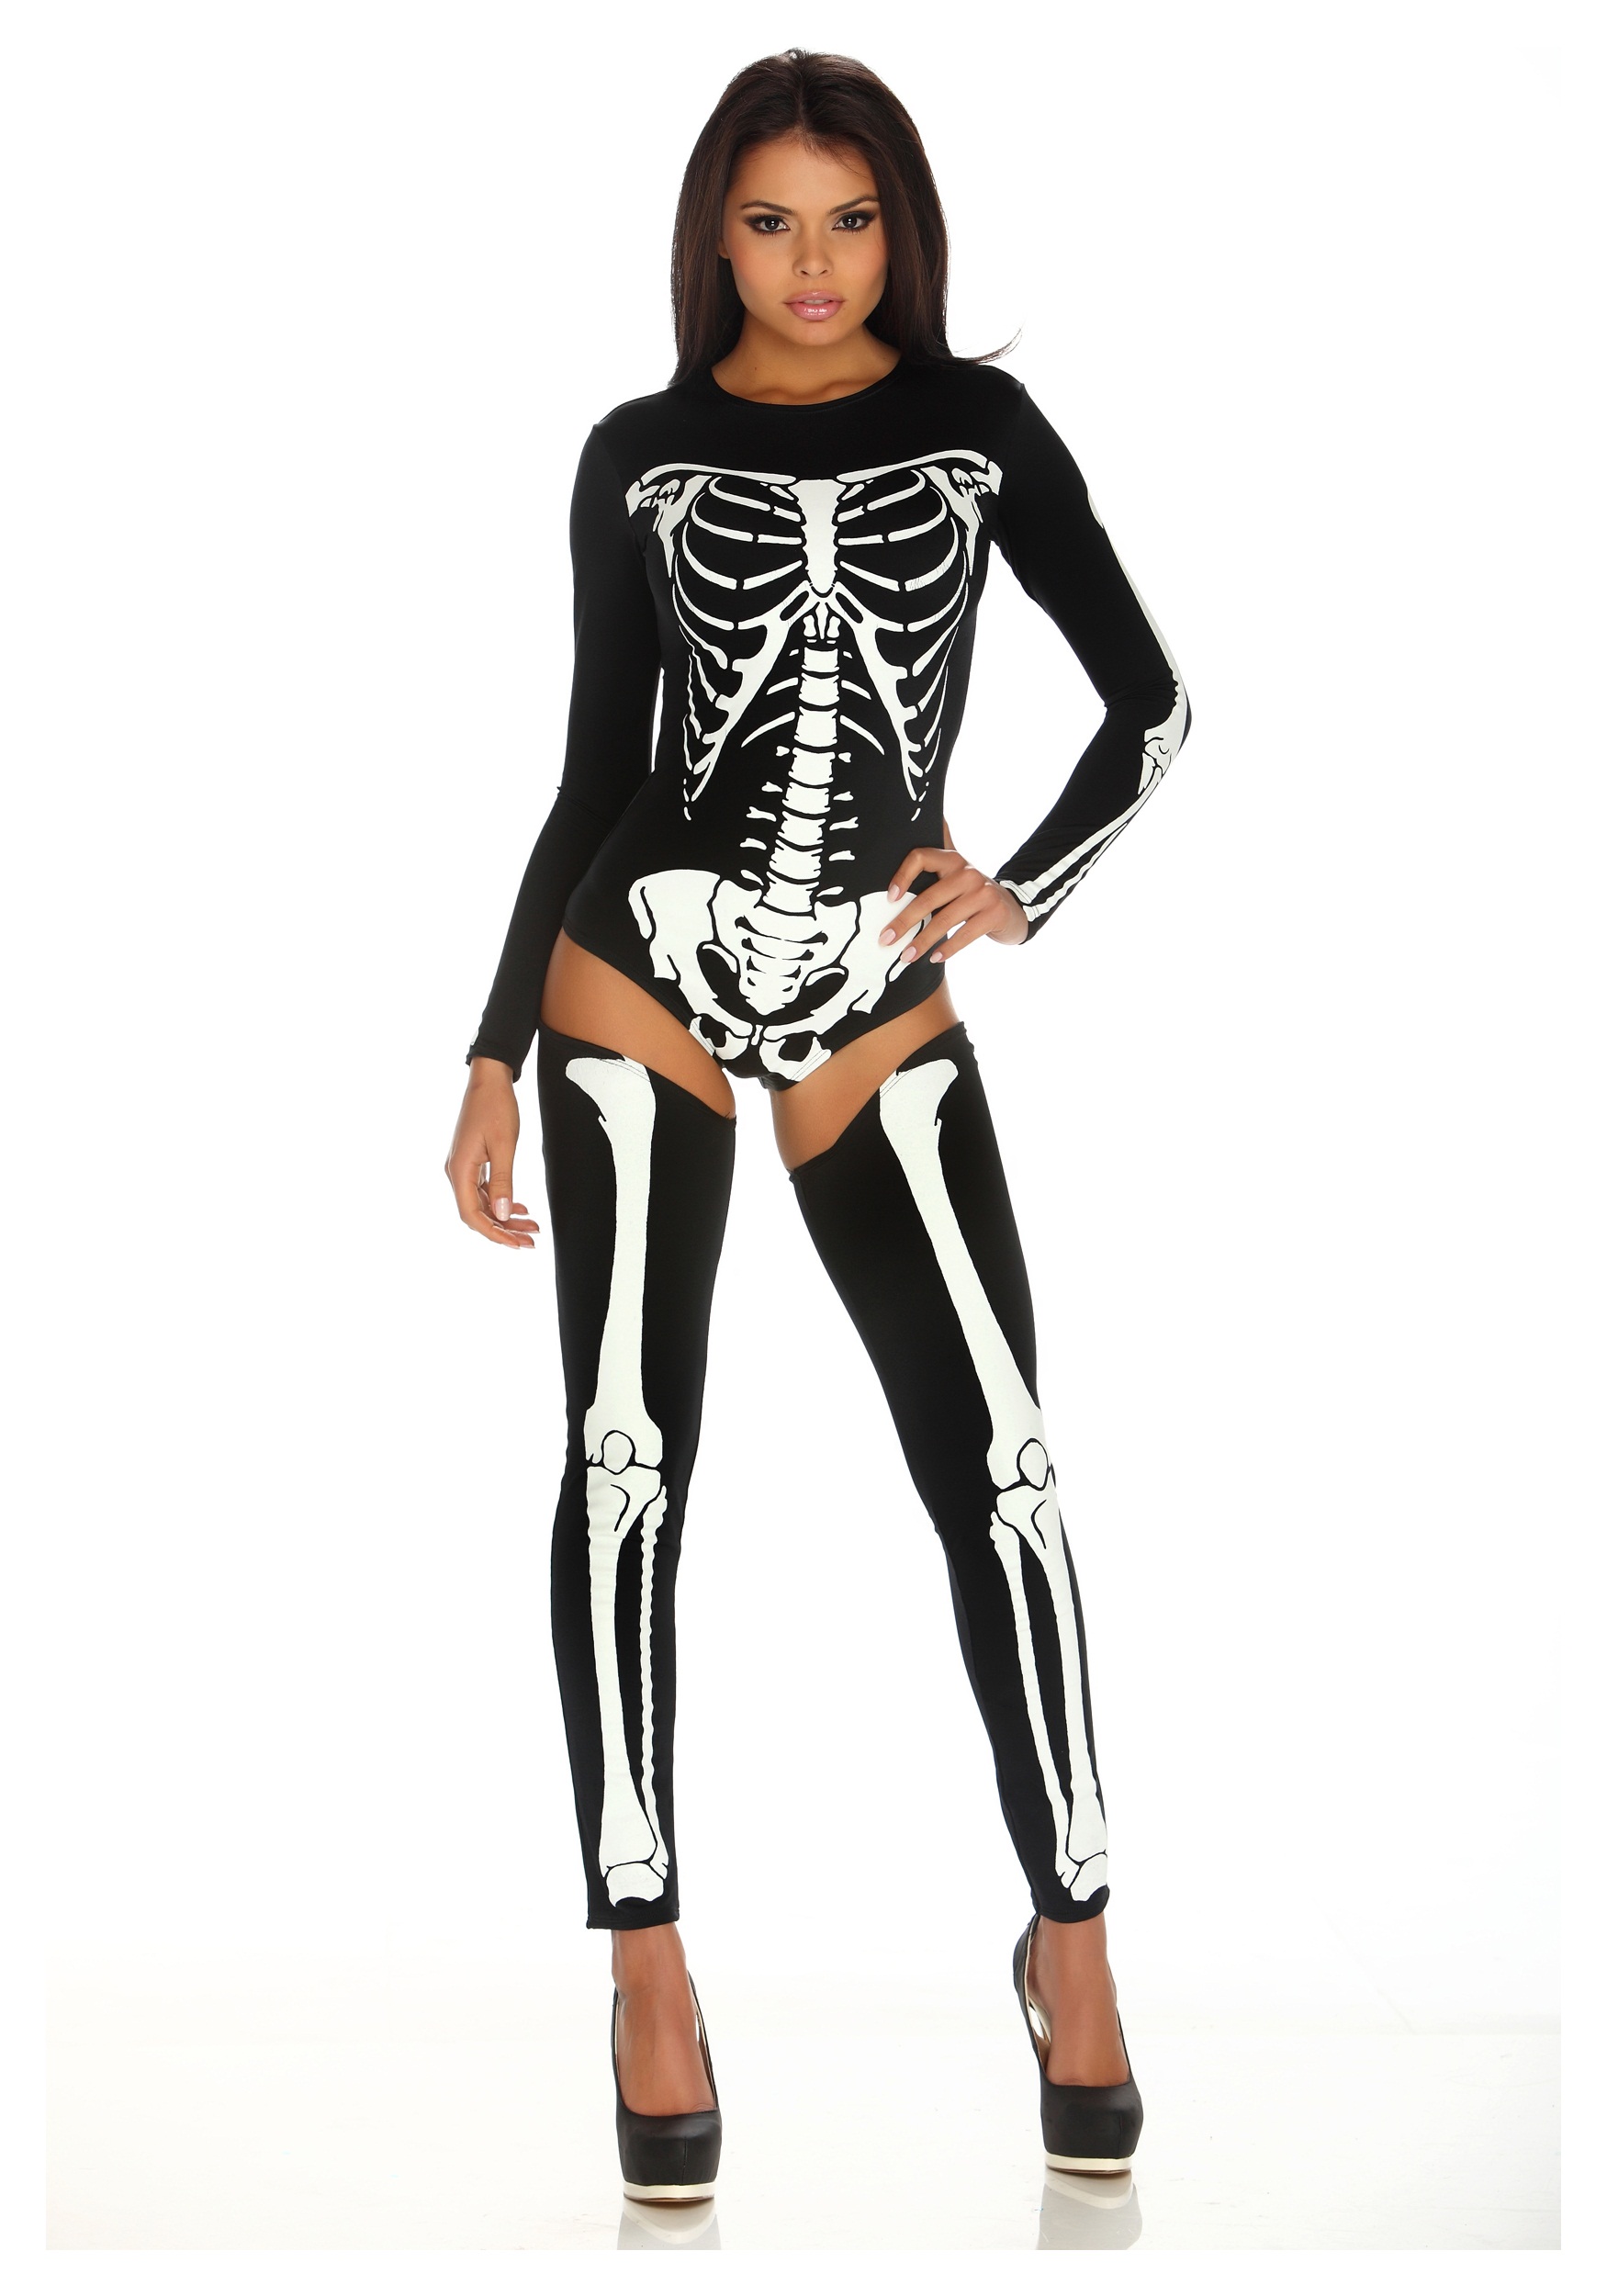 Image of Bad to the Bone Costume for Women ID FP553457-XS/S